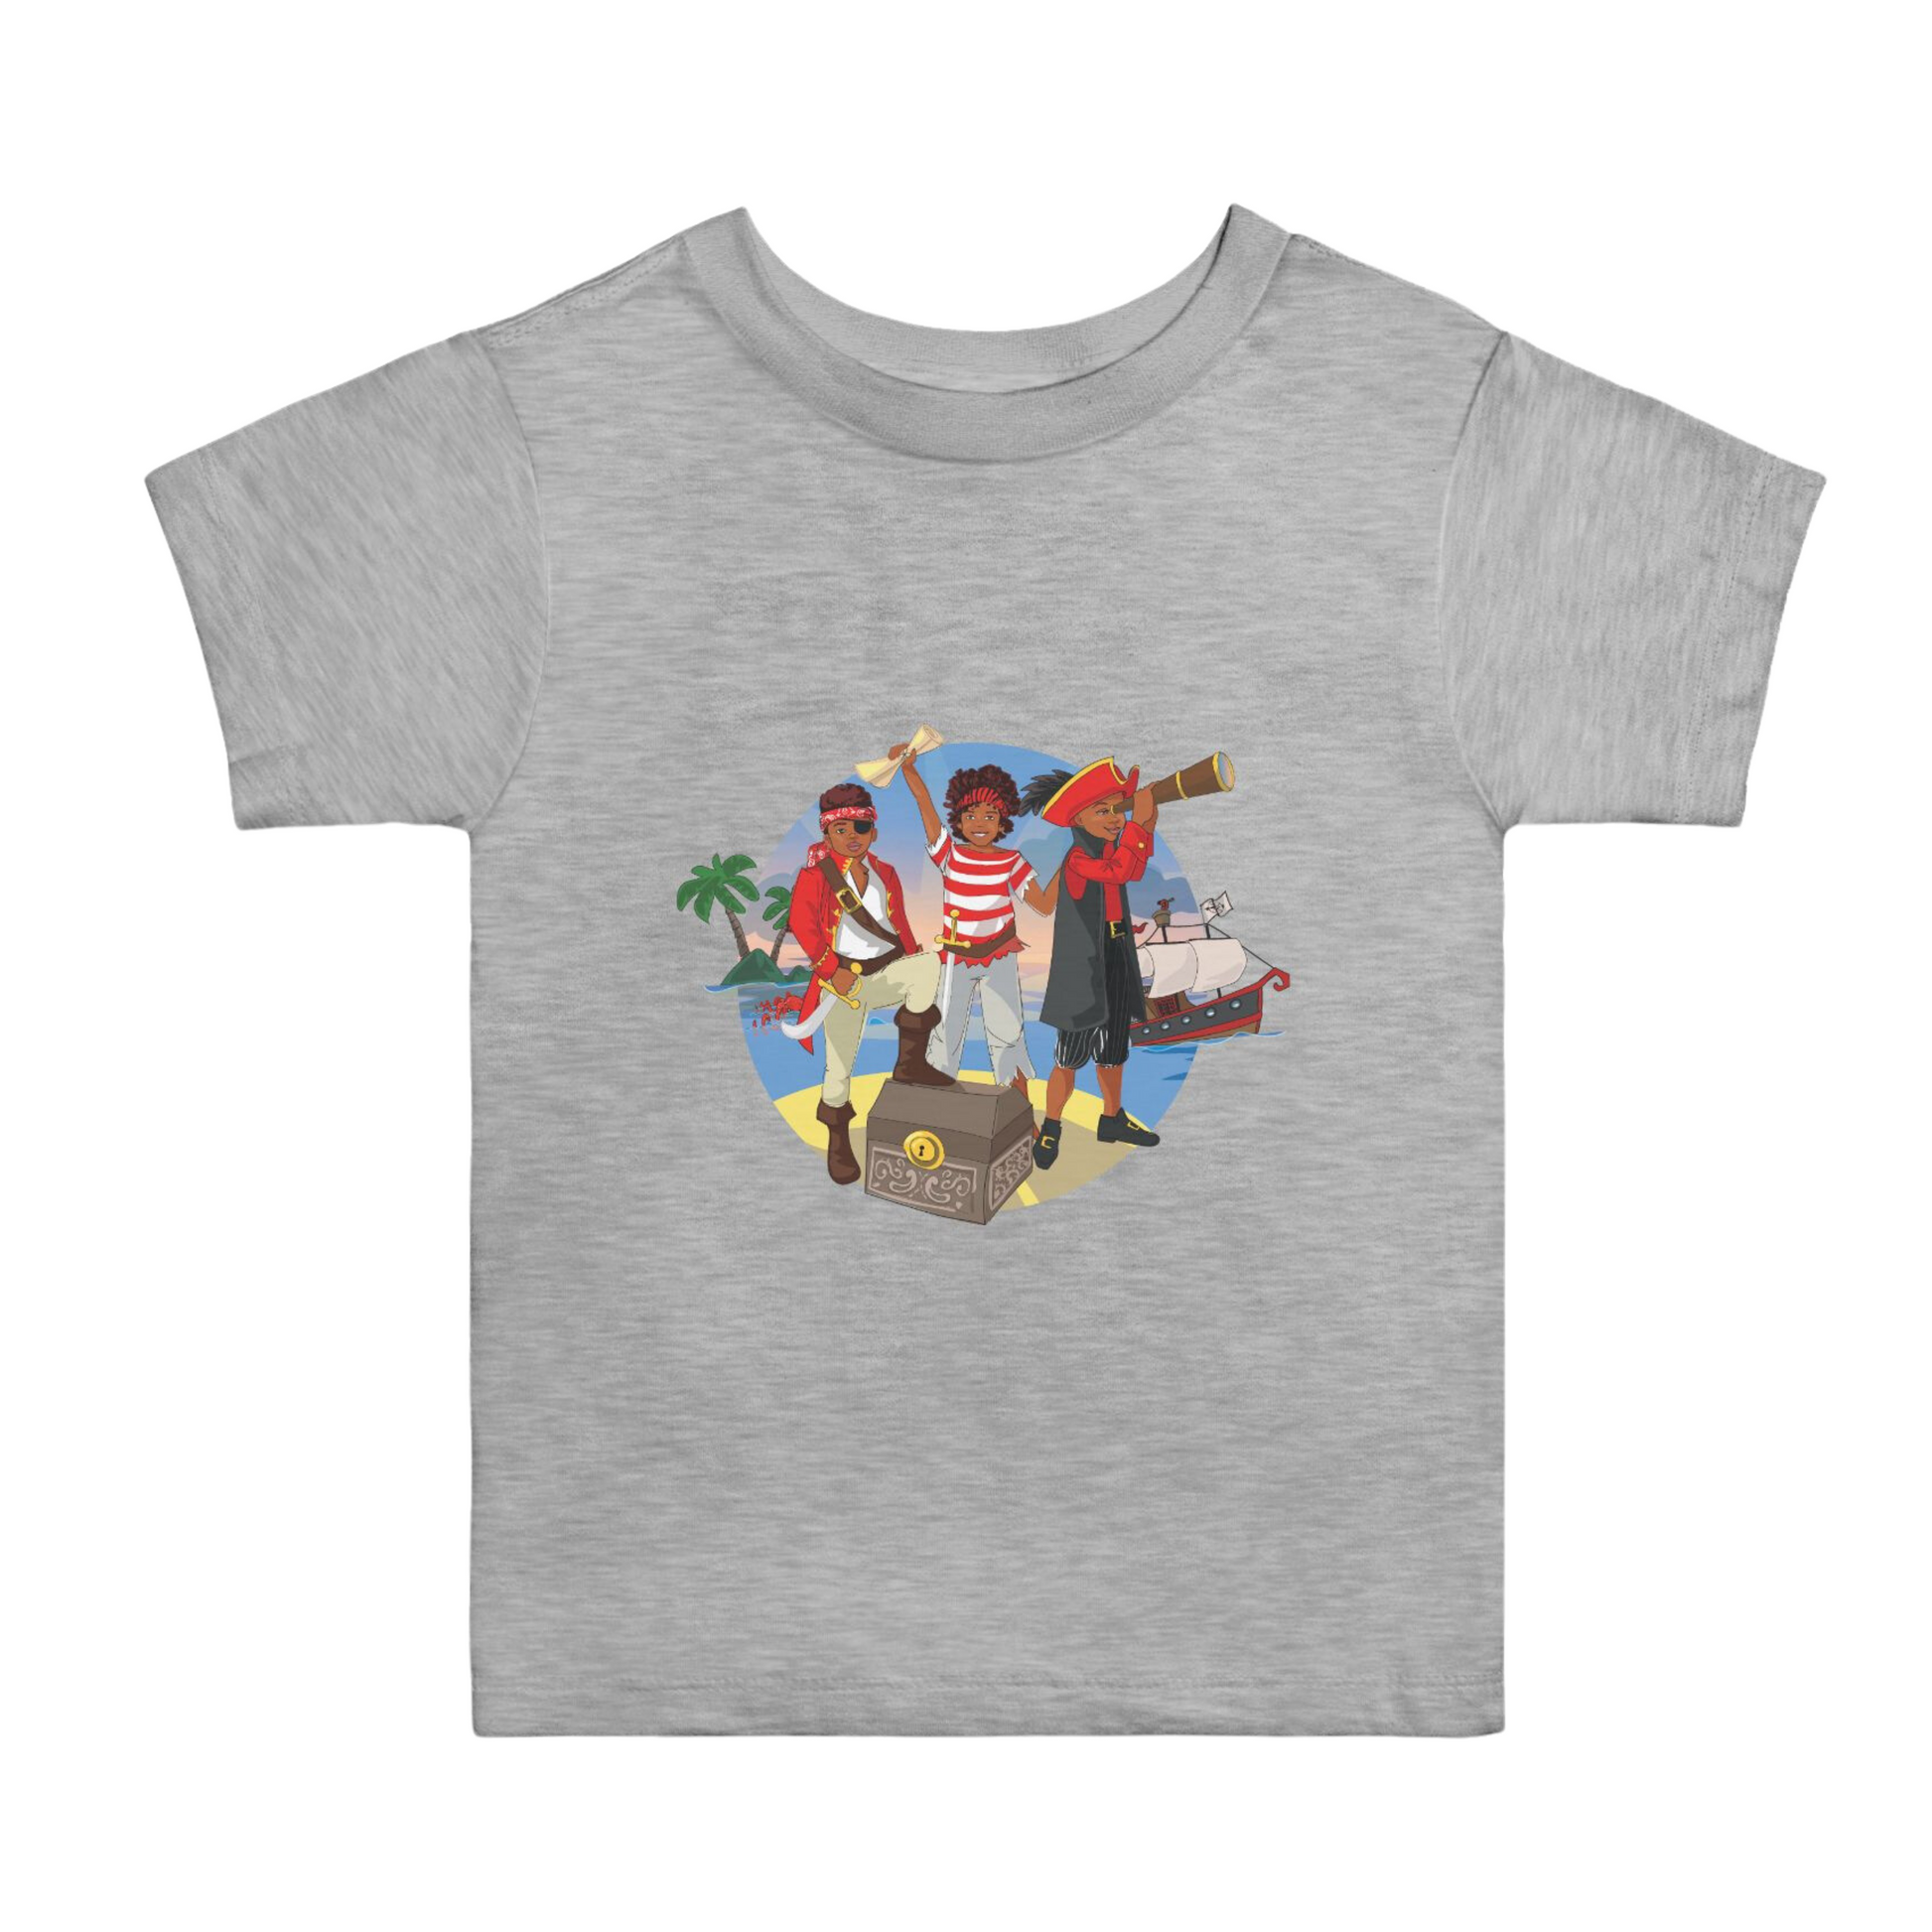 Pirate Friends Shirt for Toddlers